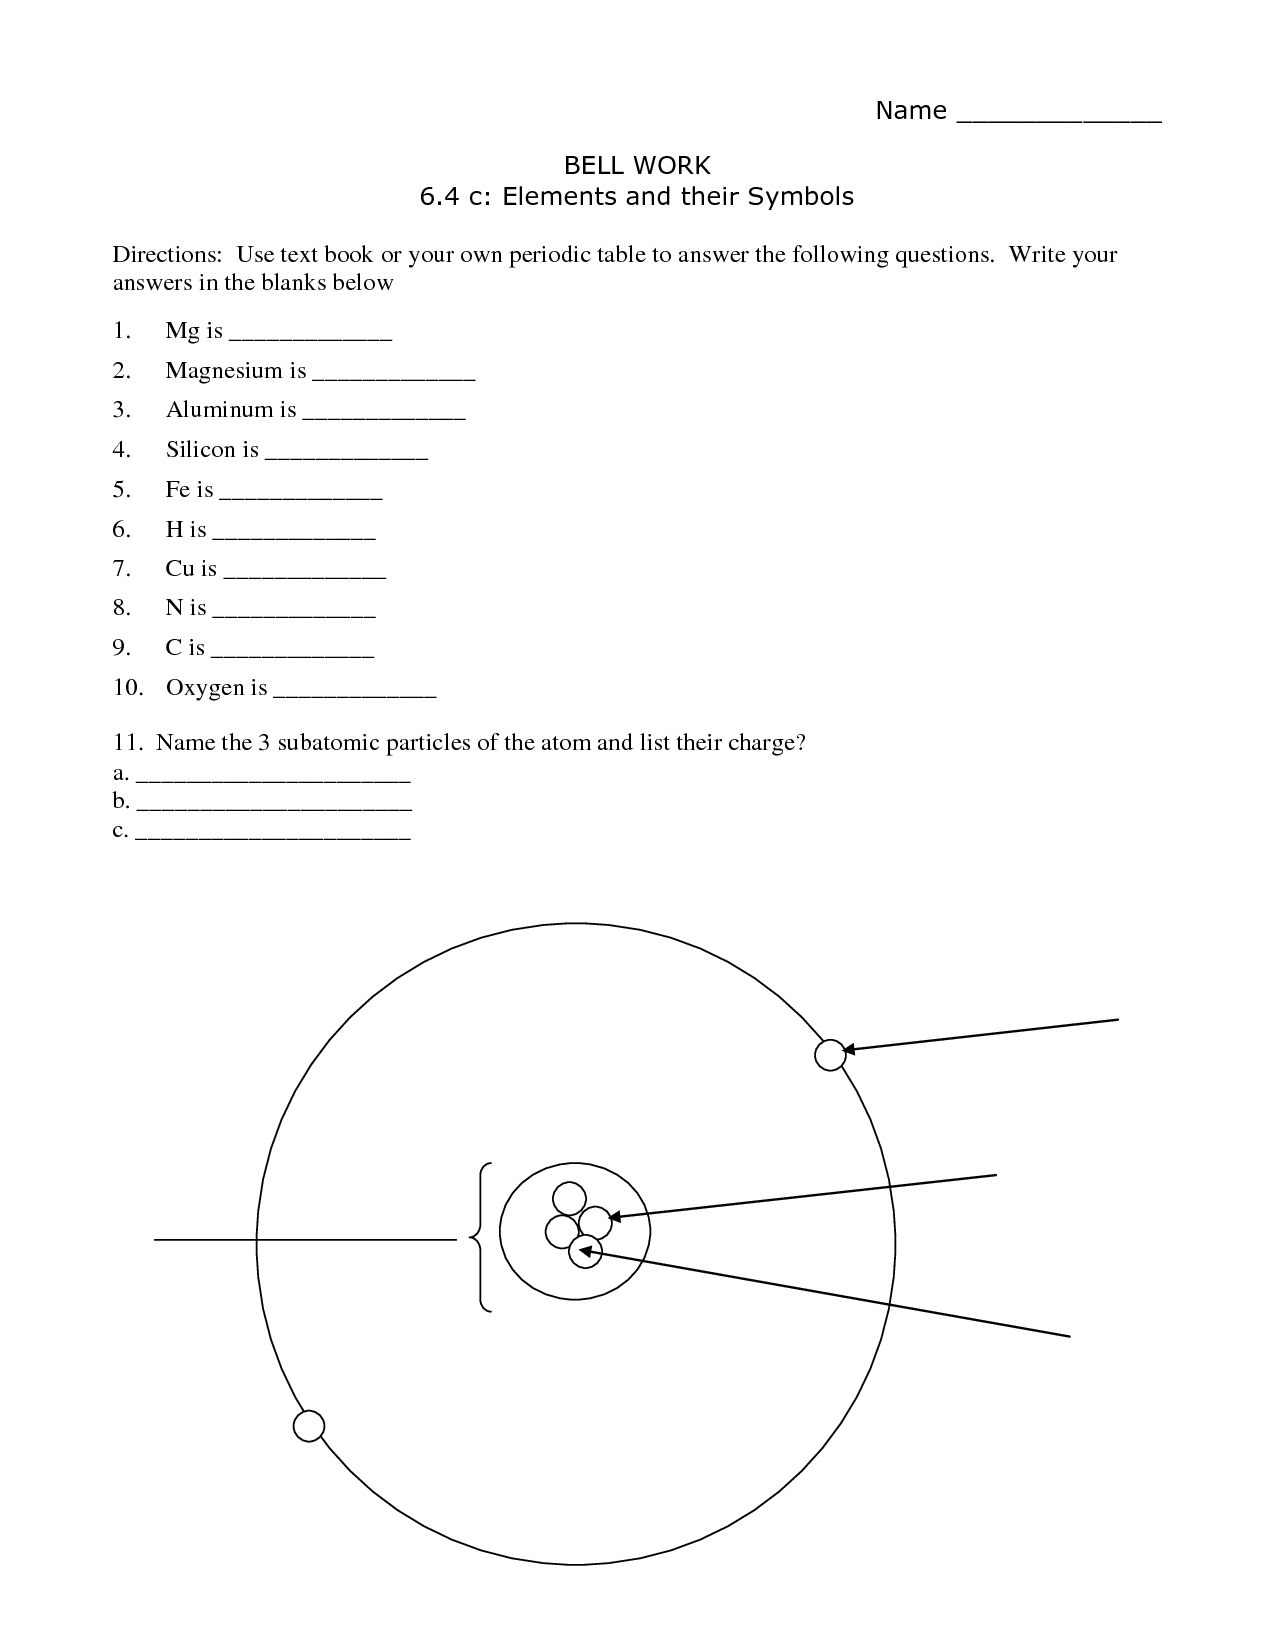 Elements and Their Symbols Worksheet Answers Image